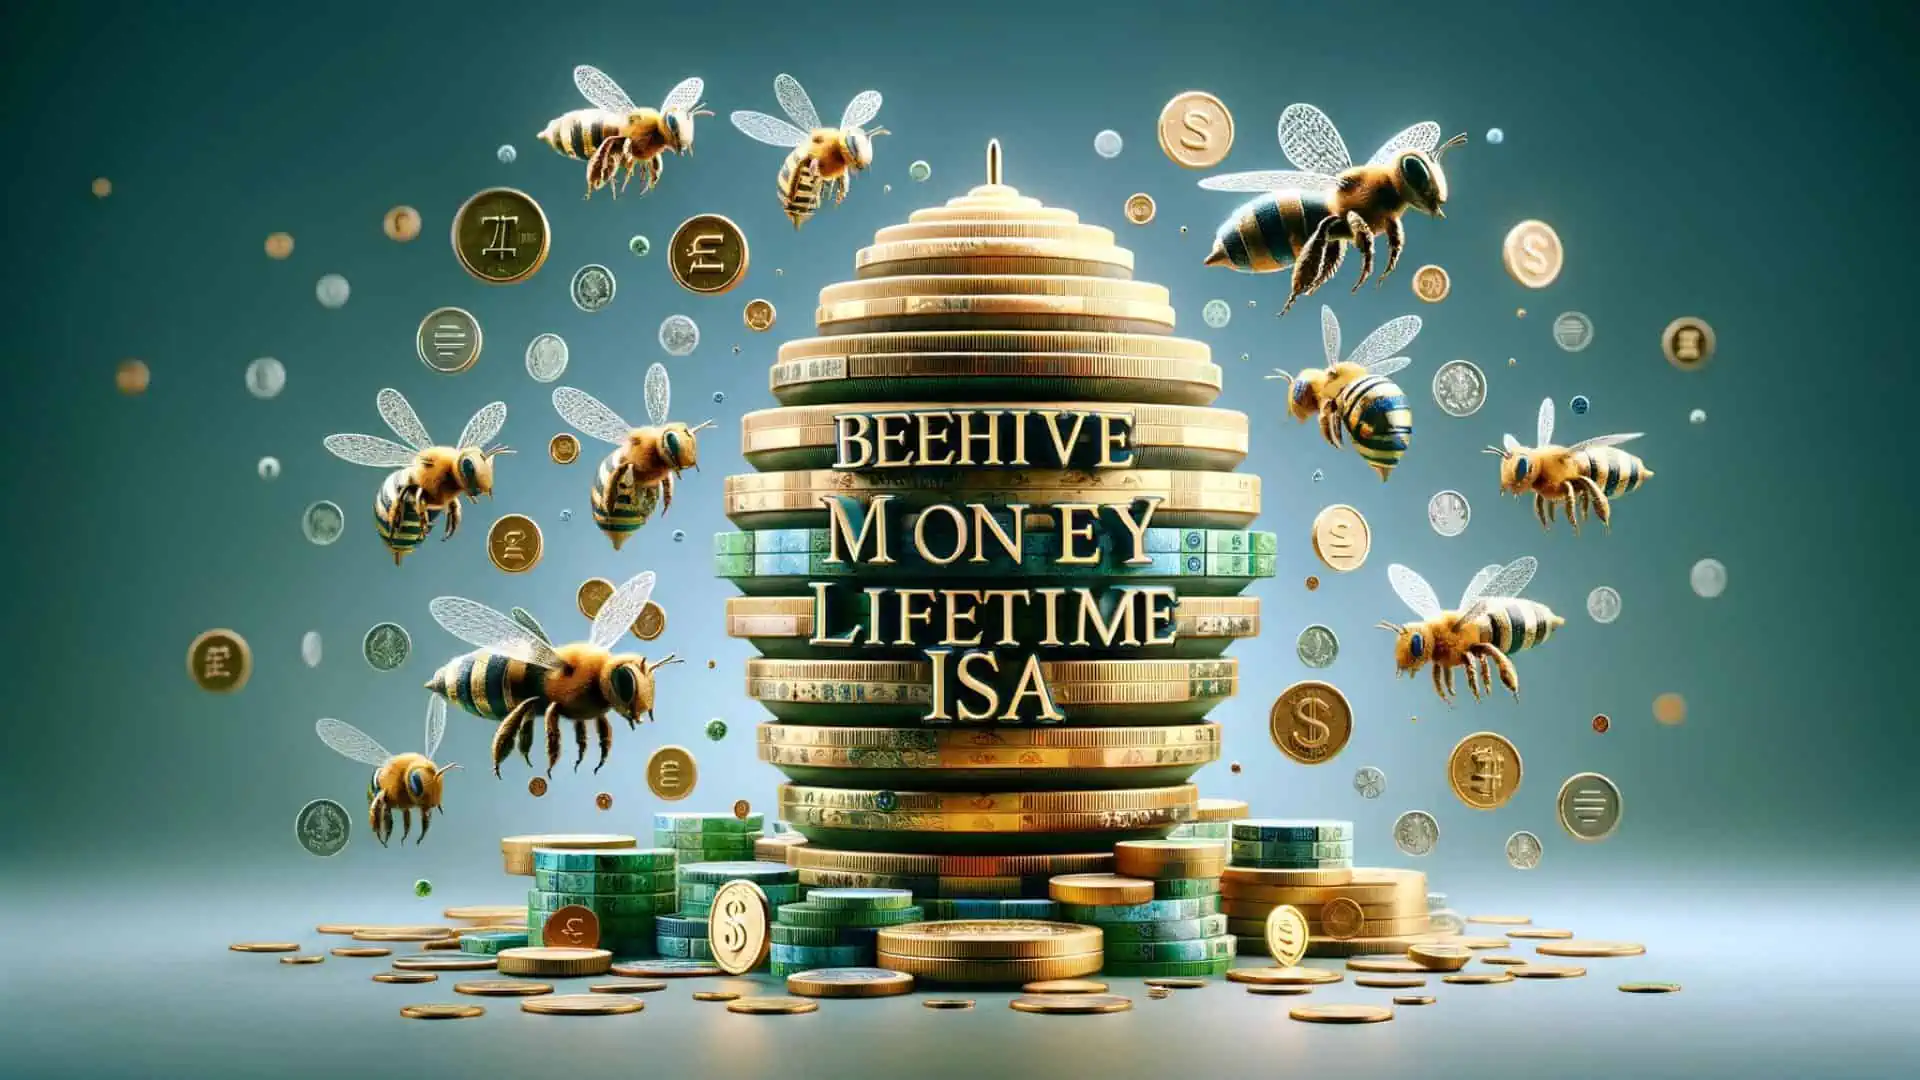 Beehive Money Lifetime ISA Review, Interest Rate, Withdrawal and Bonus